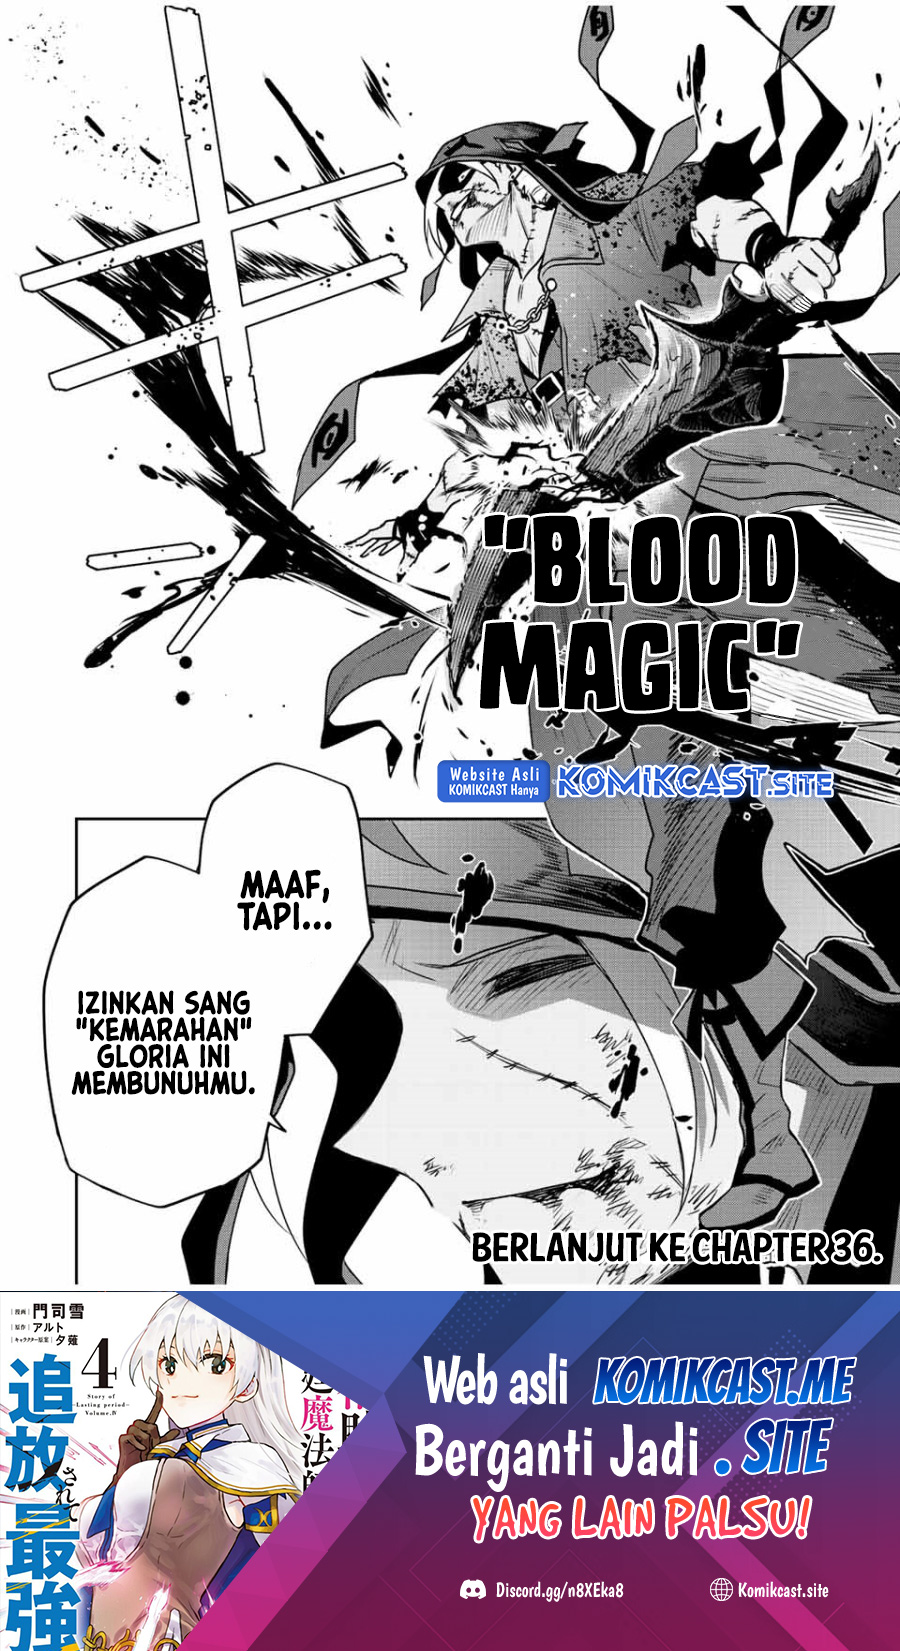 A Court Magician, Who Was Focused On Supportive Magic Because His Allies Were Too Weak, Aims To Become The Strongest After Being Banished Chapter 35 - 141